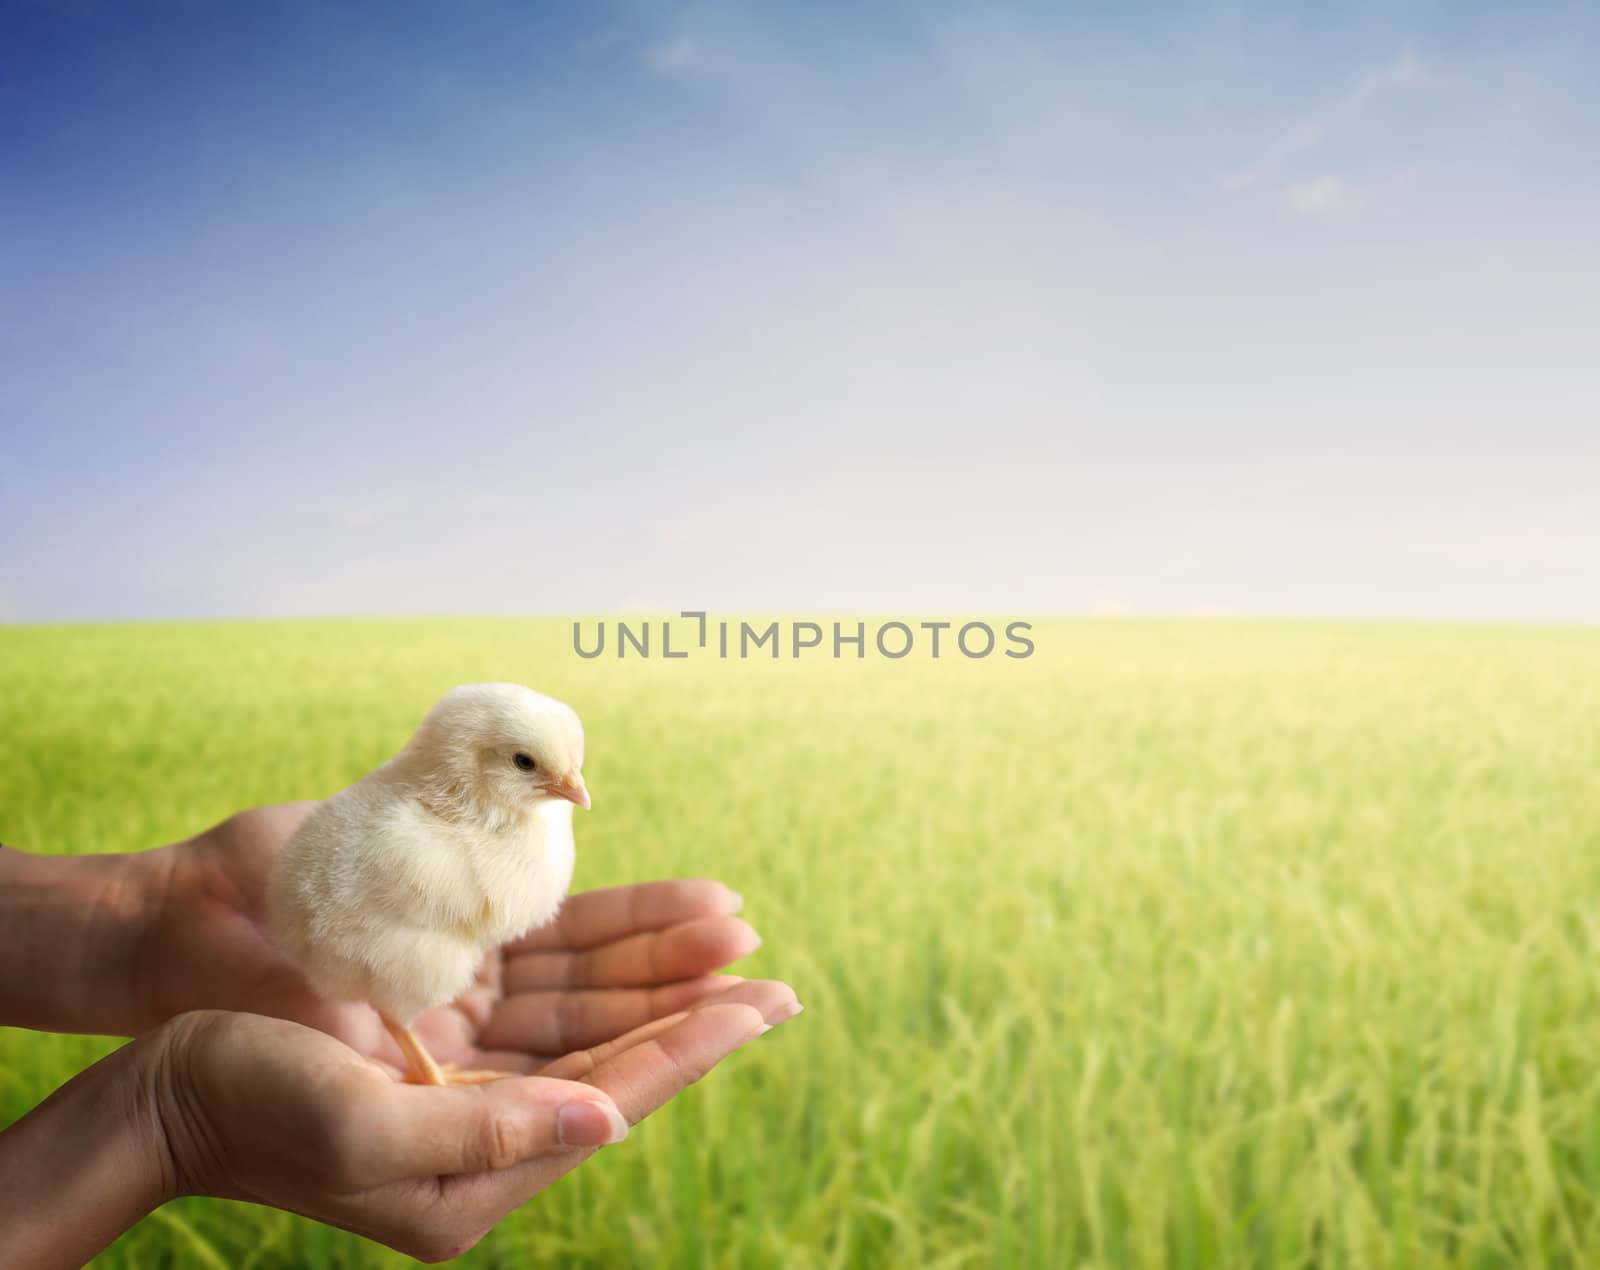 hand holding a young chick early in morning sunrise grass field